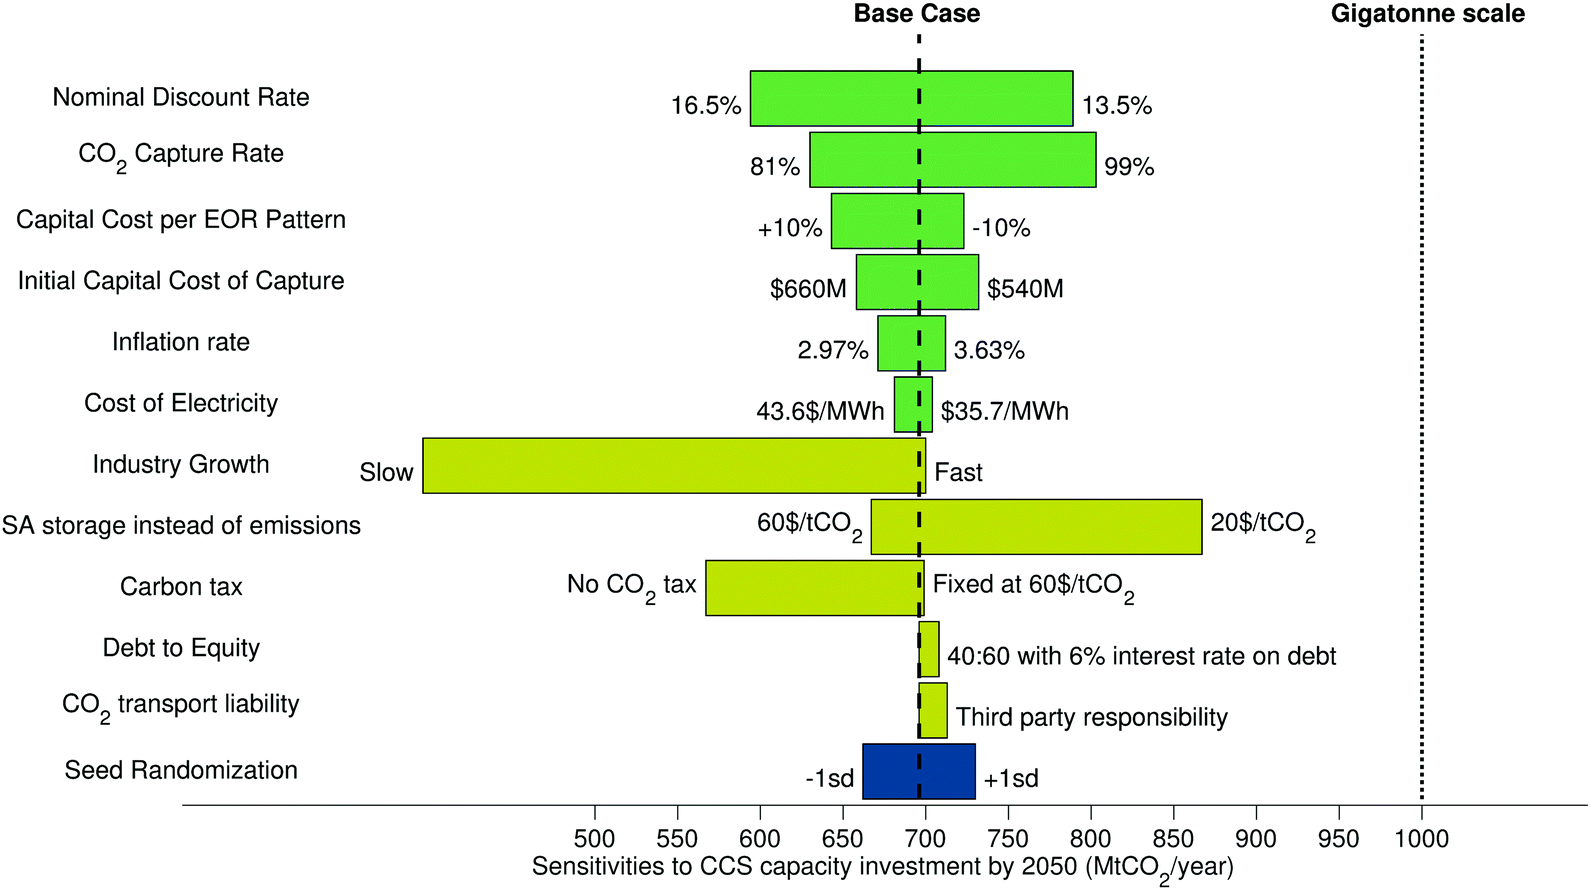 Co 2 Enhanced Oil Recovery A Catalyst For Gigatonne Scale Carbon Capture And Storage Deployment Energy Environmental Science Rsc Publishing Doi 10 1039 C7ee02102j